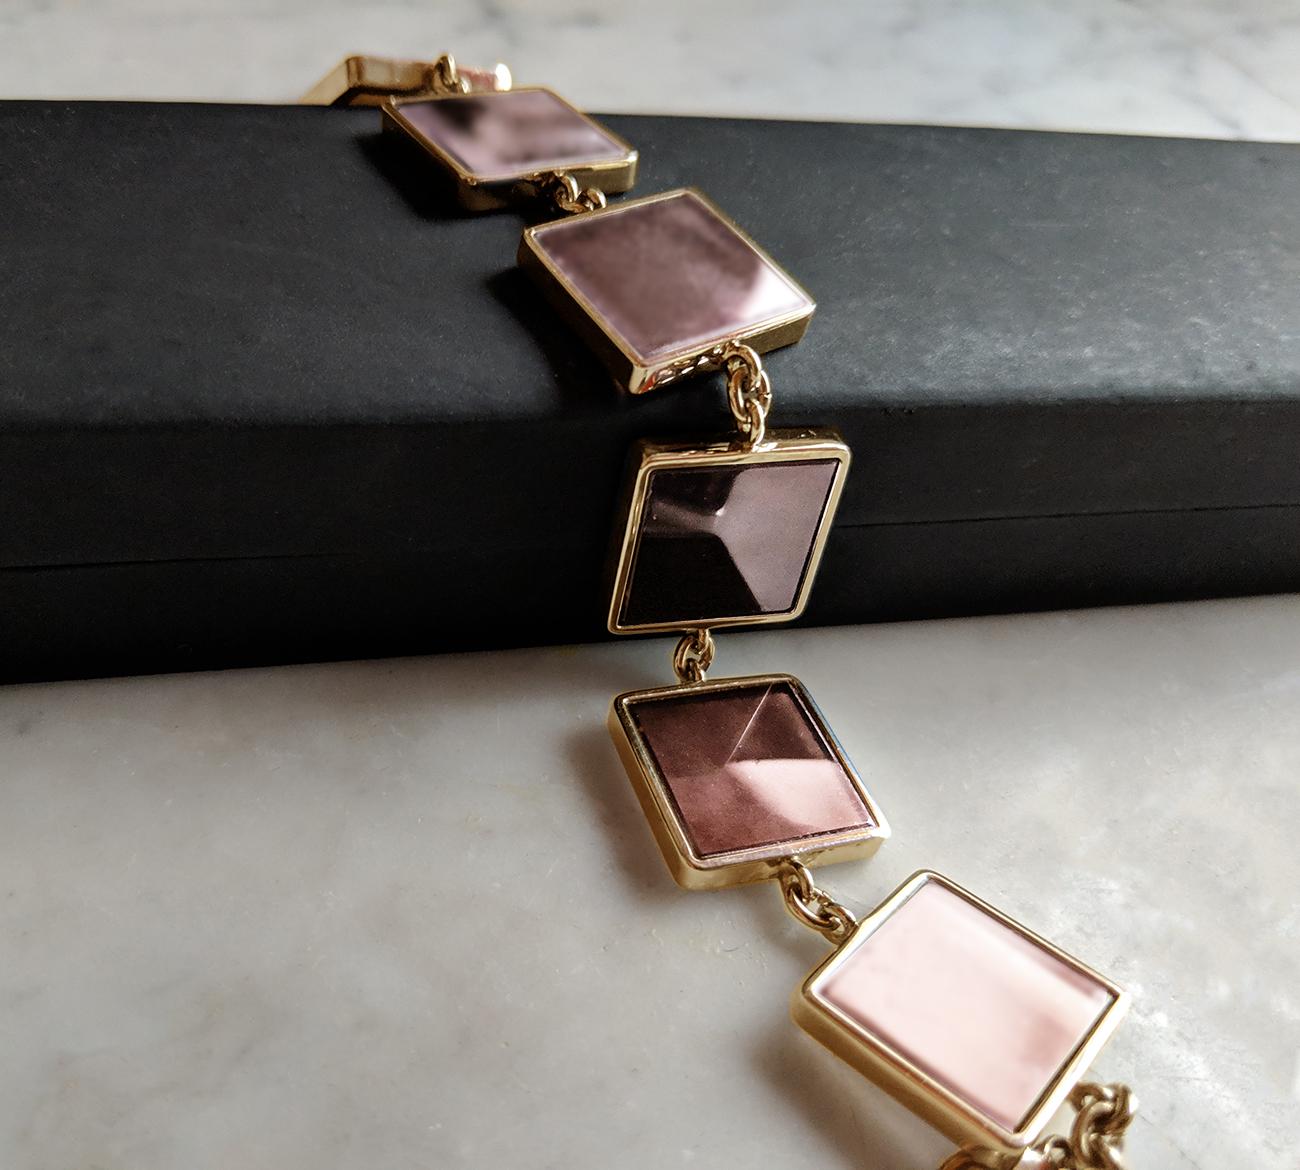 This designer jewellery bracelet is in rose gold plated sterling silver with seven 15x15x3 mm rose onyx gems. The Ink collection was featured in Harper's Bazaar UA and Vogue UA published issues.

The bracelet shines gently because of the gold and